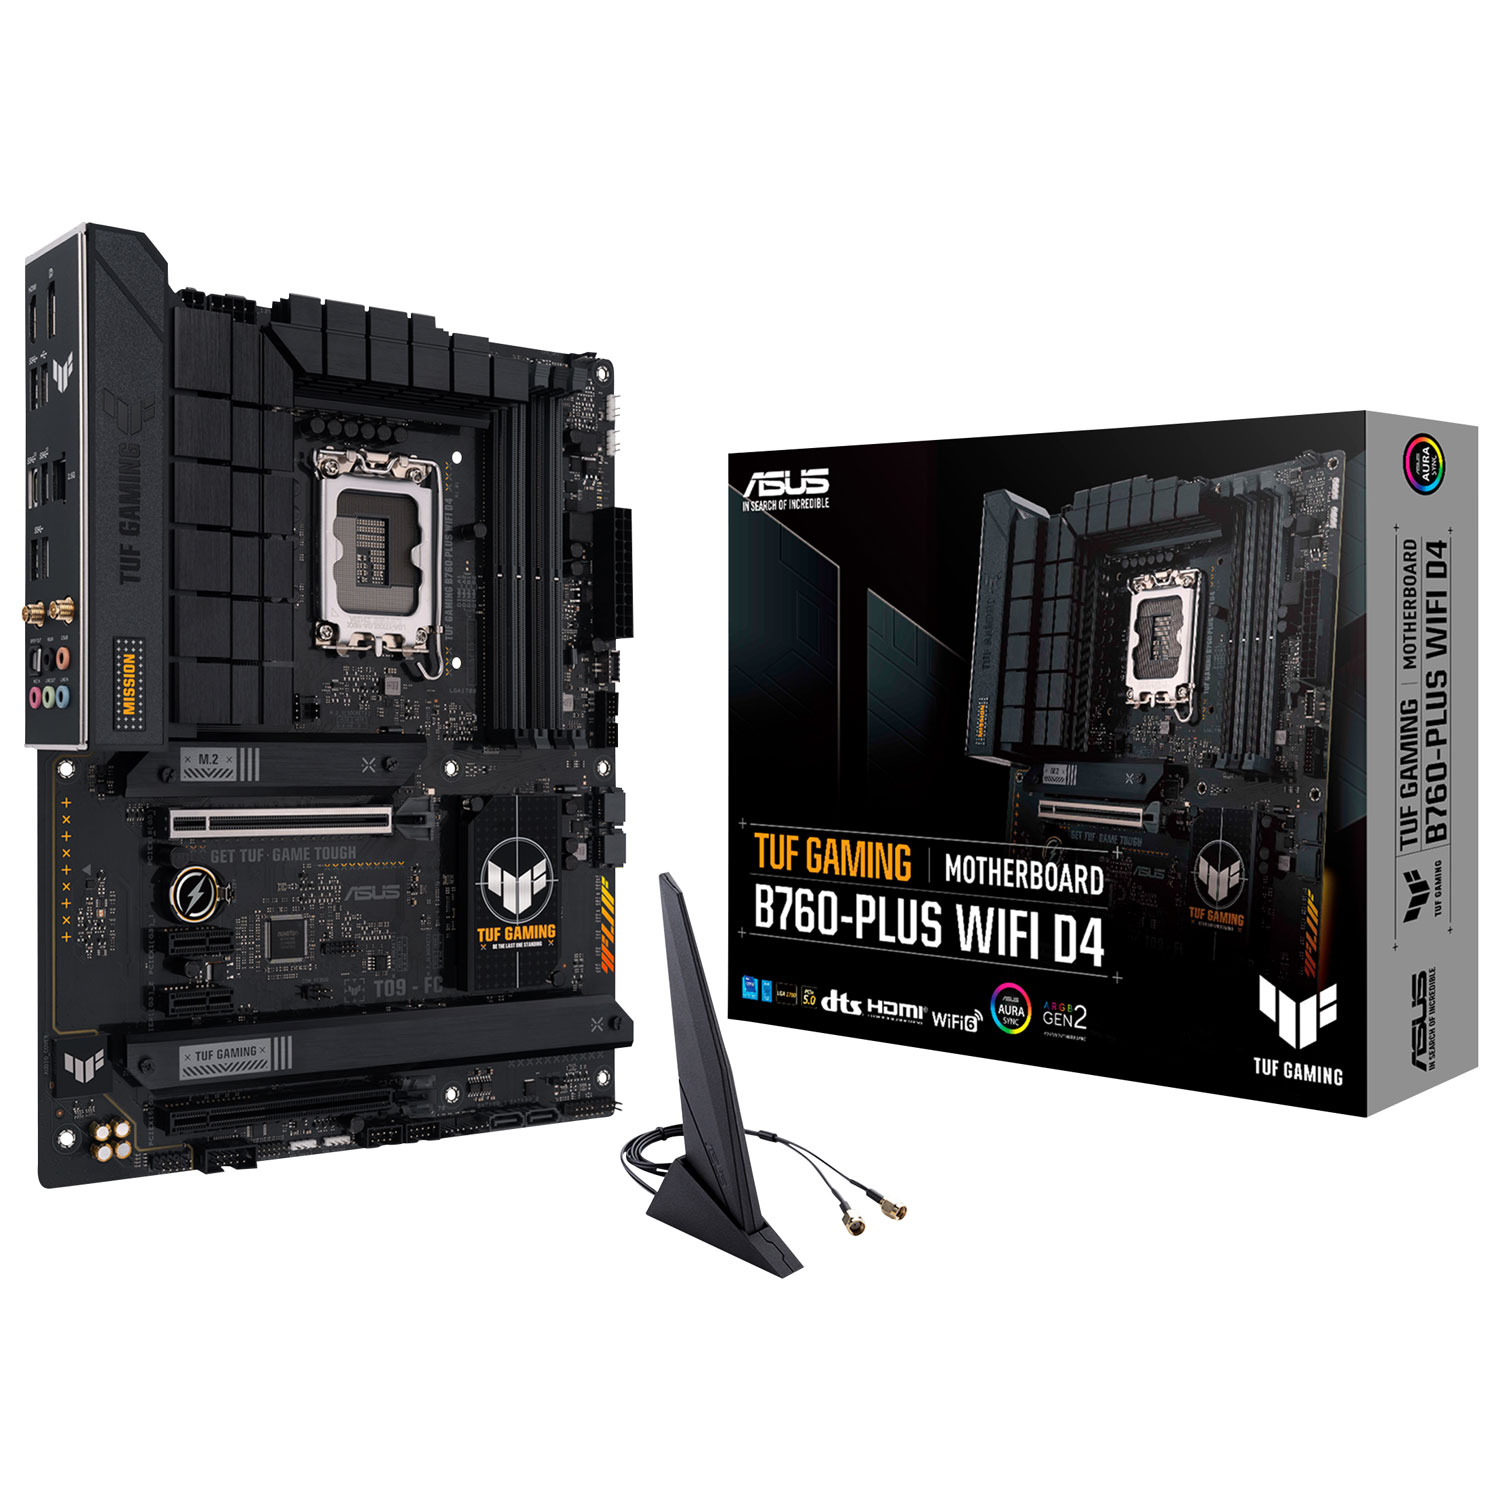 ASUS TUF Gaming B760-Plus Wi-Fi D4 ATX DDR4 Motherboard for 12/13th Gen Intel CPUs